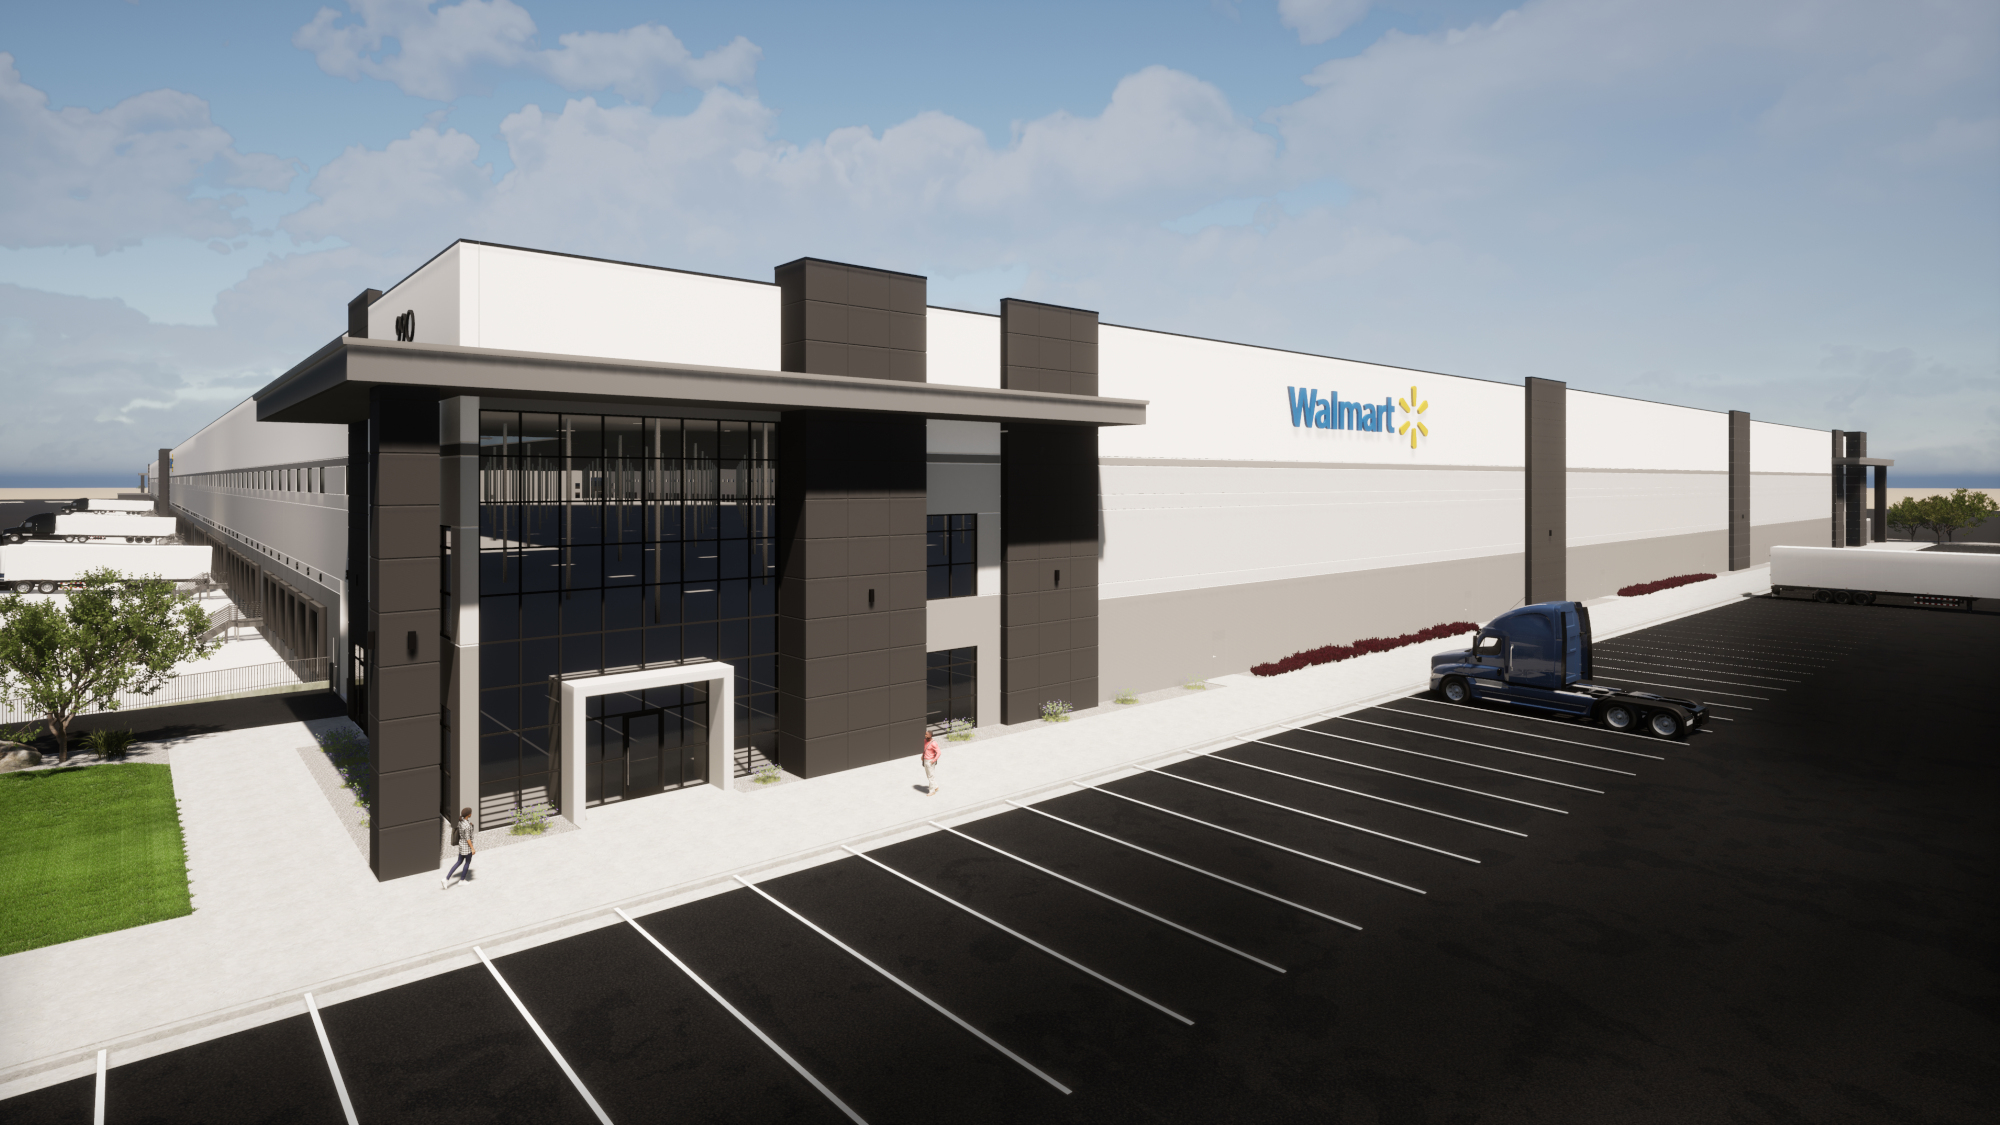 Walmart announces changes in Canada